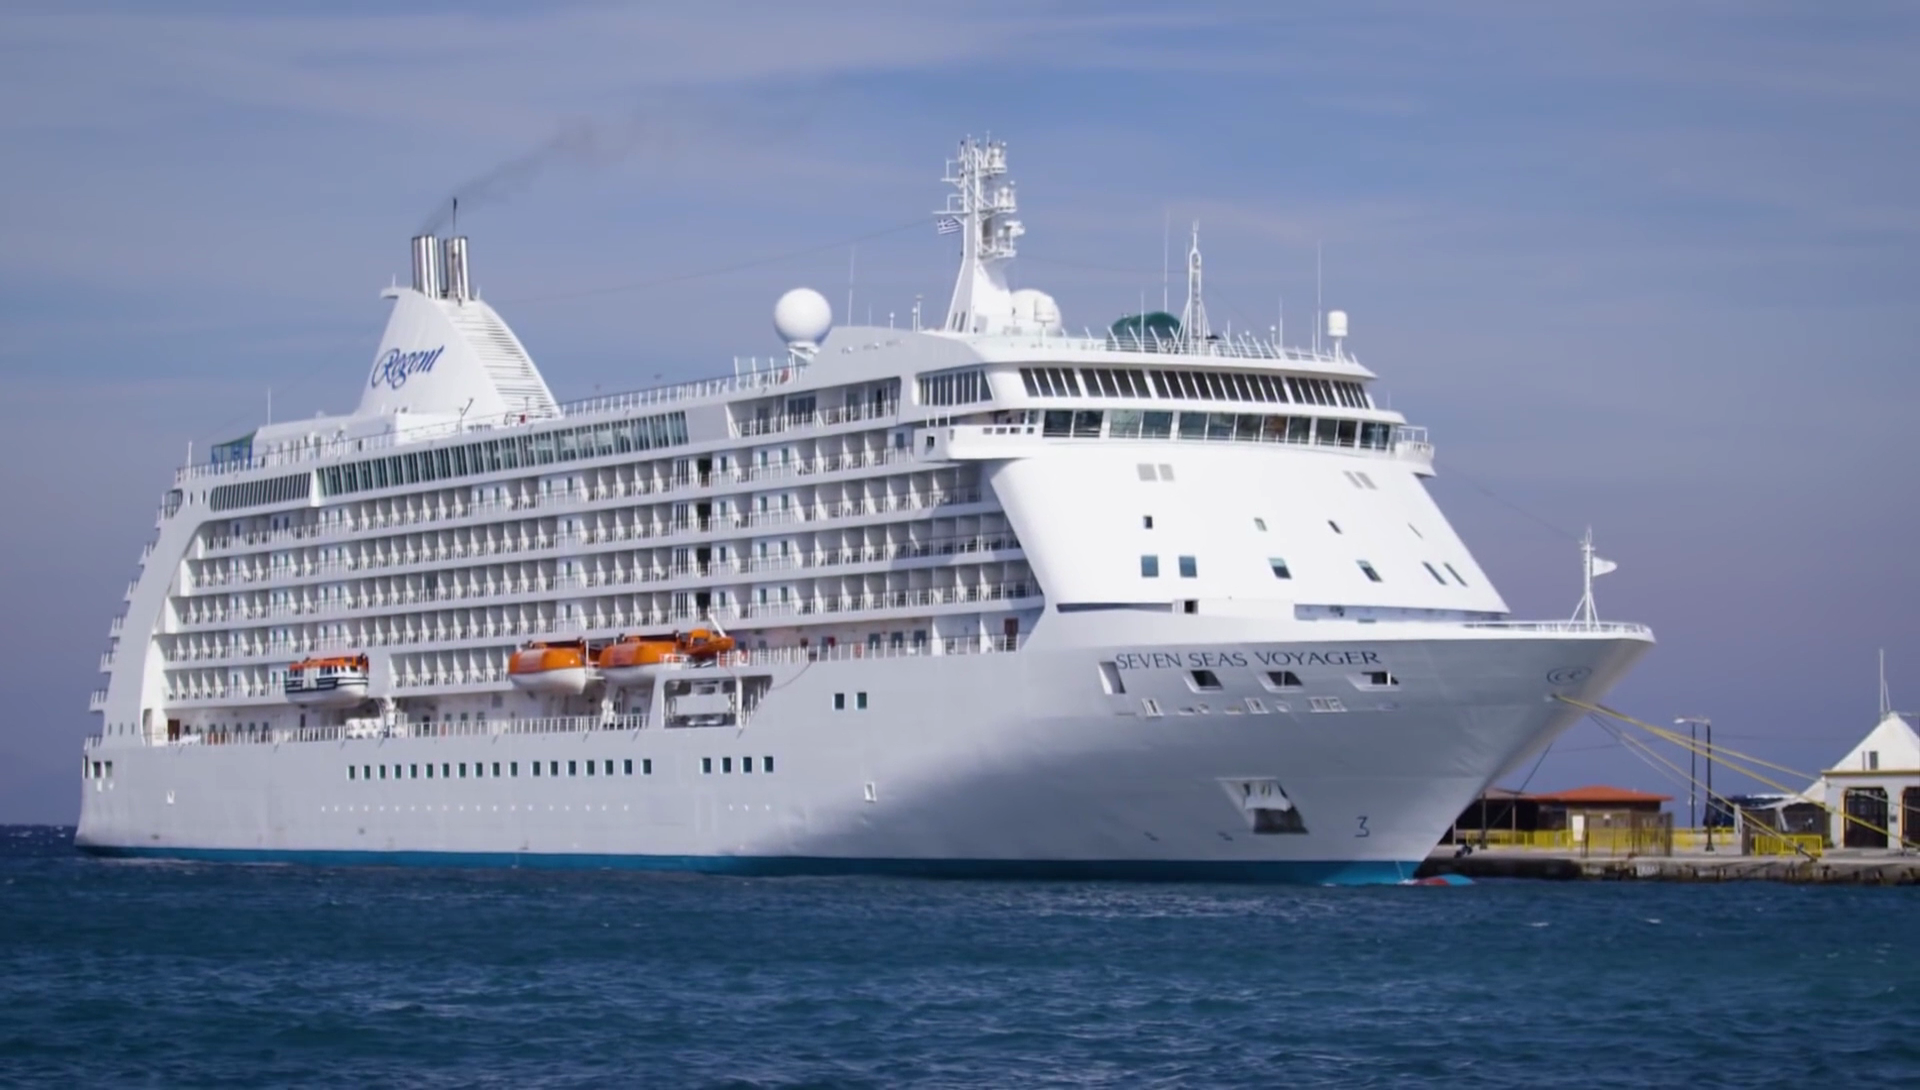 luxury cruise ship video download